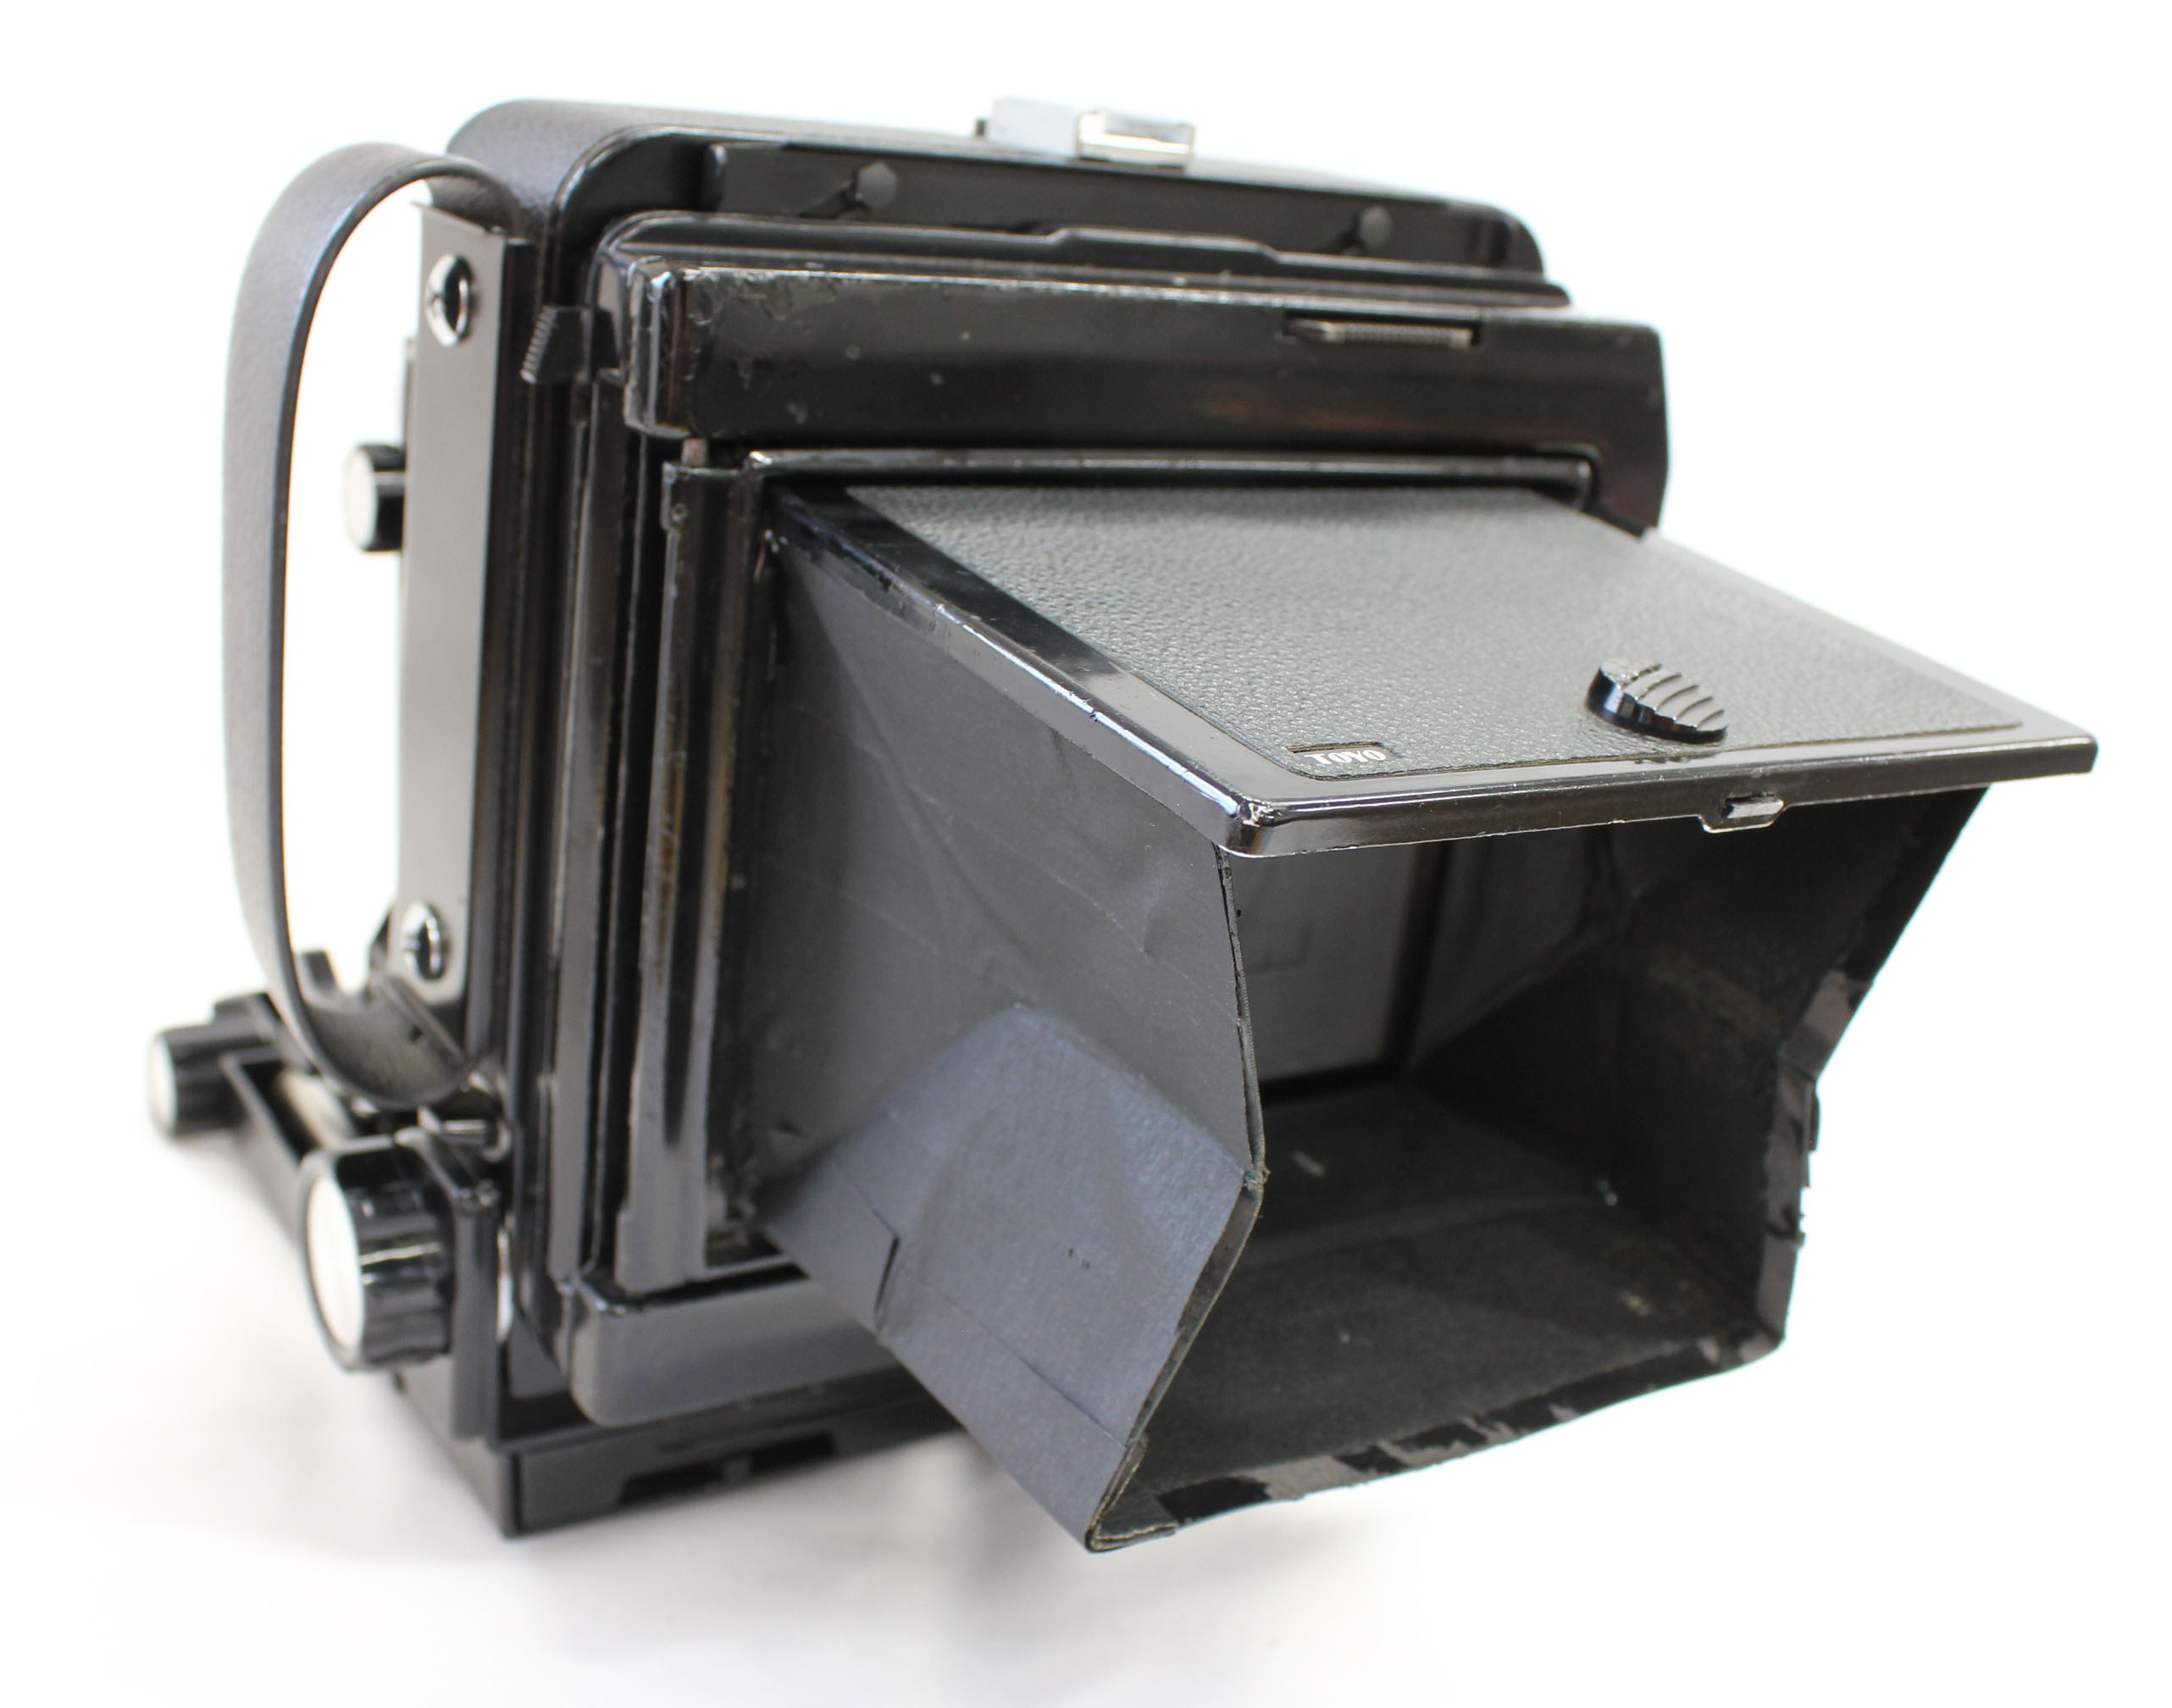 Toyo Field 45A 4x5 Large Format Film Camera with Revolving Back from Japan Photo 8